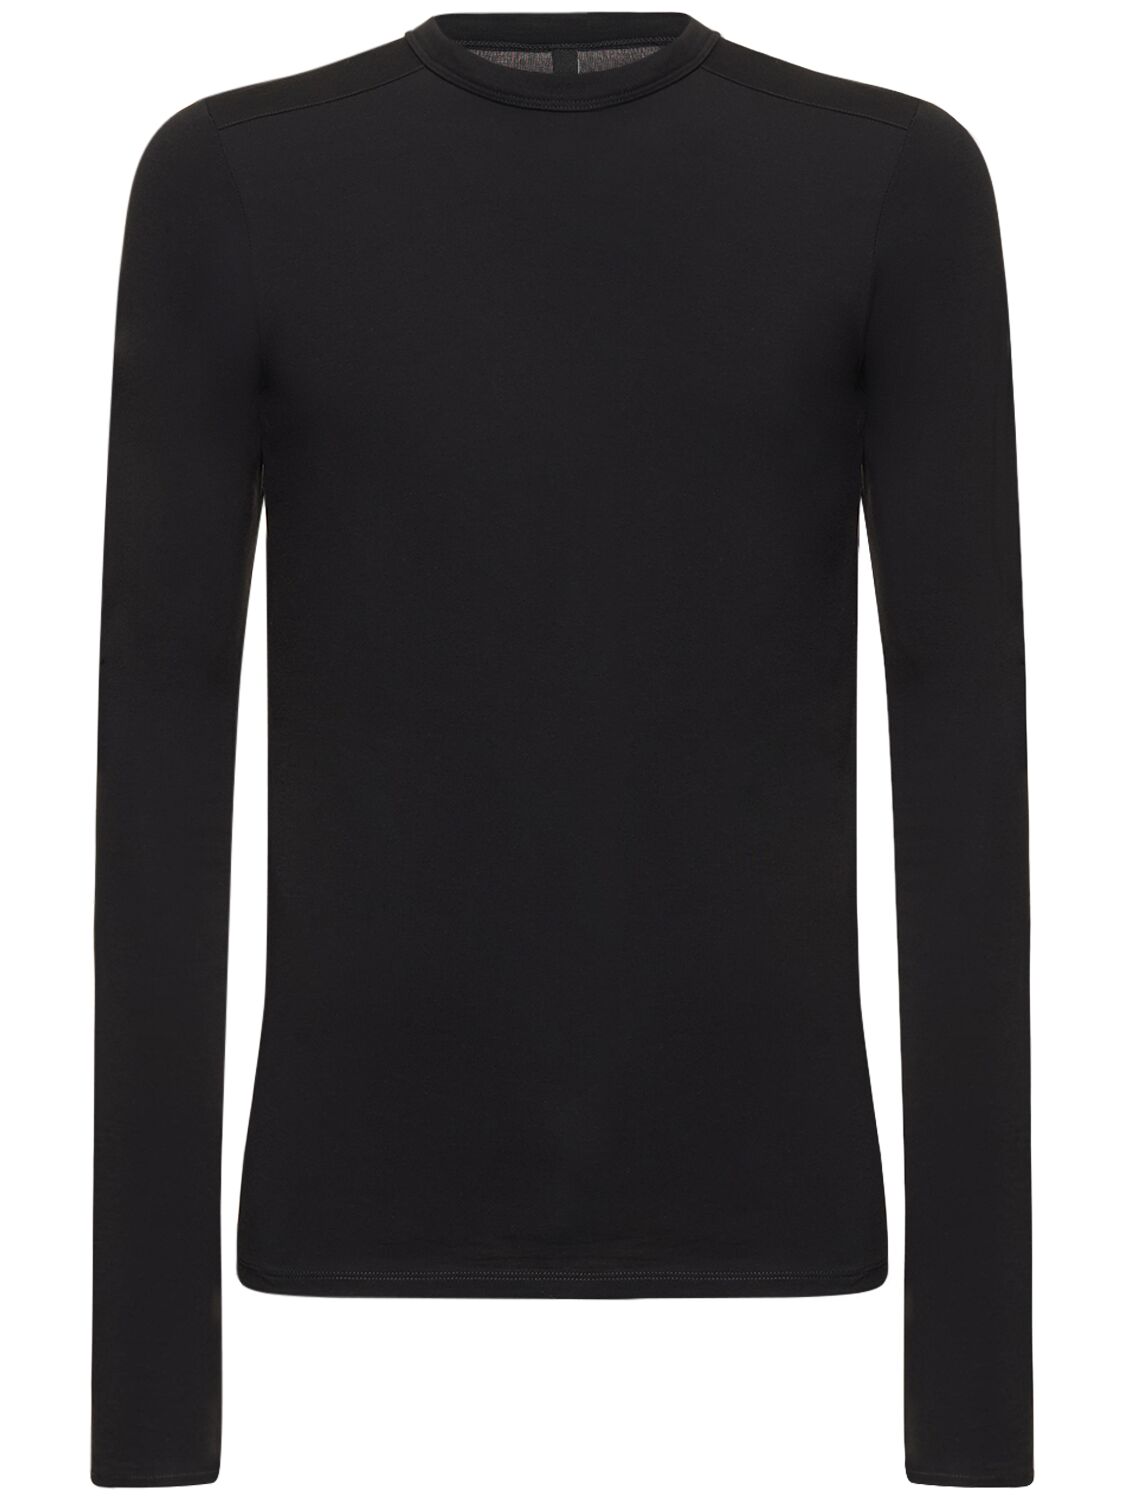 Image of Garment Dyed Cotton Long Sleeve Top